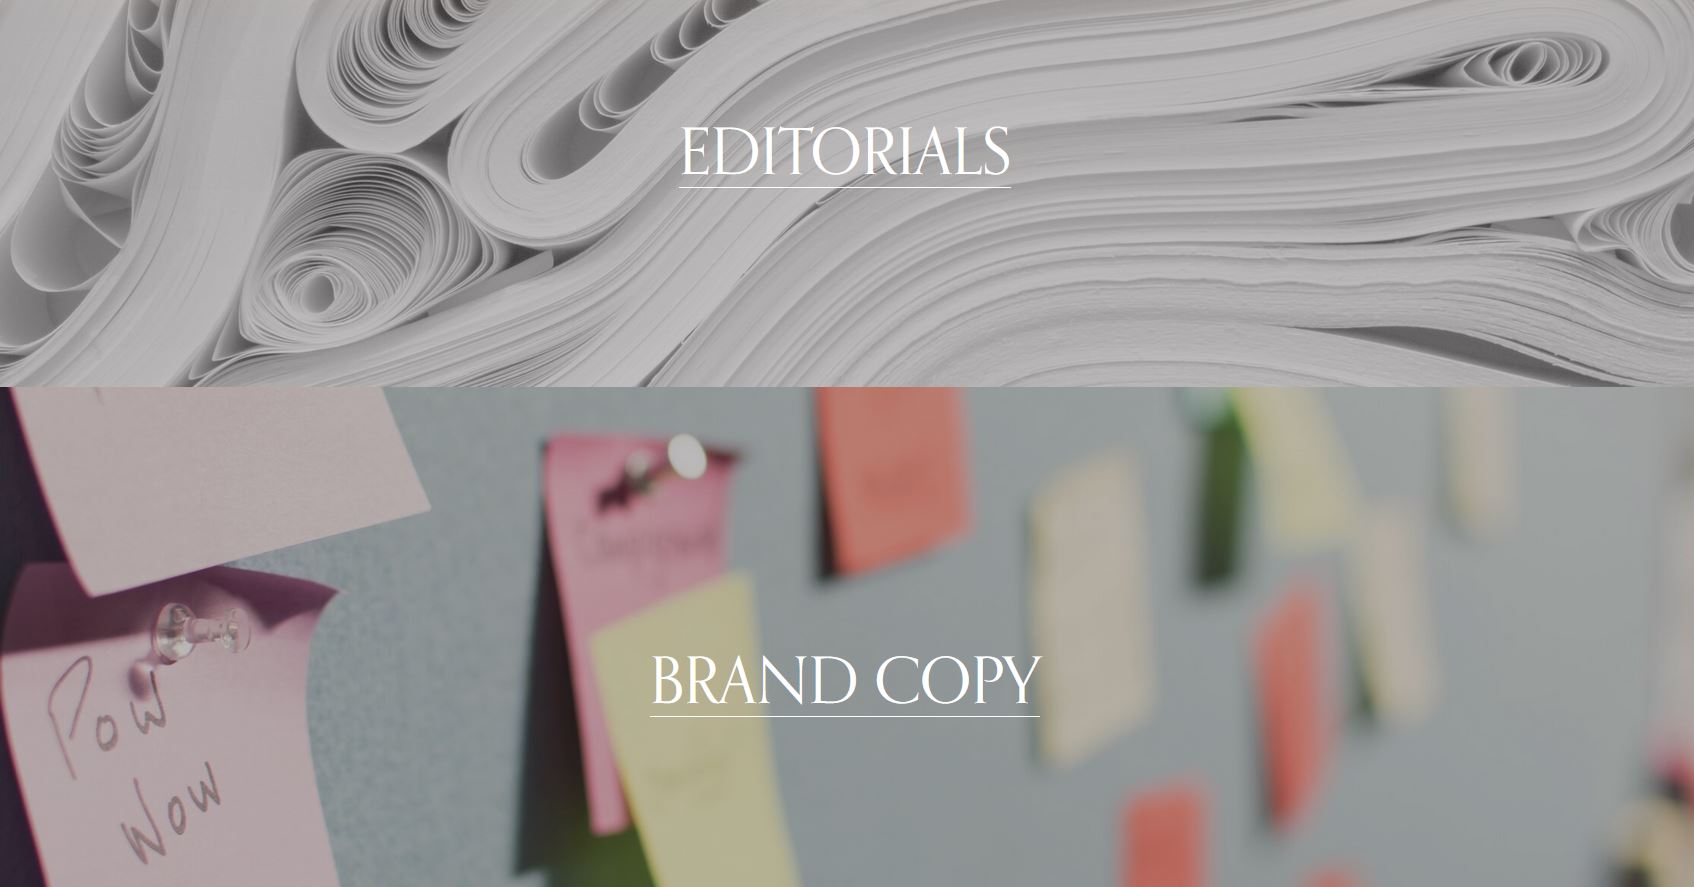 A navigation page that separates editorials and brand copy works